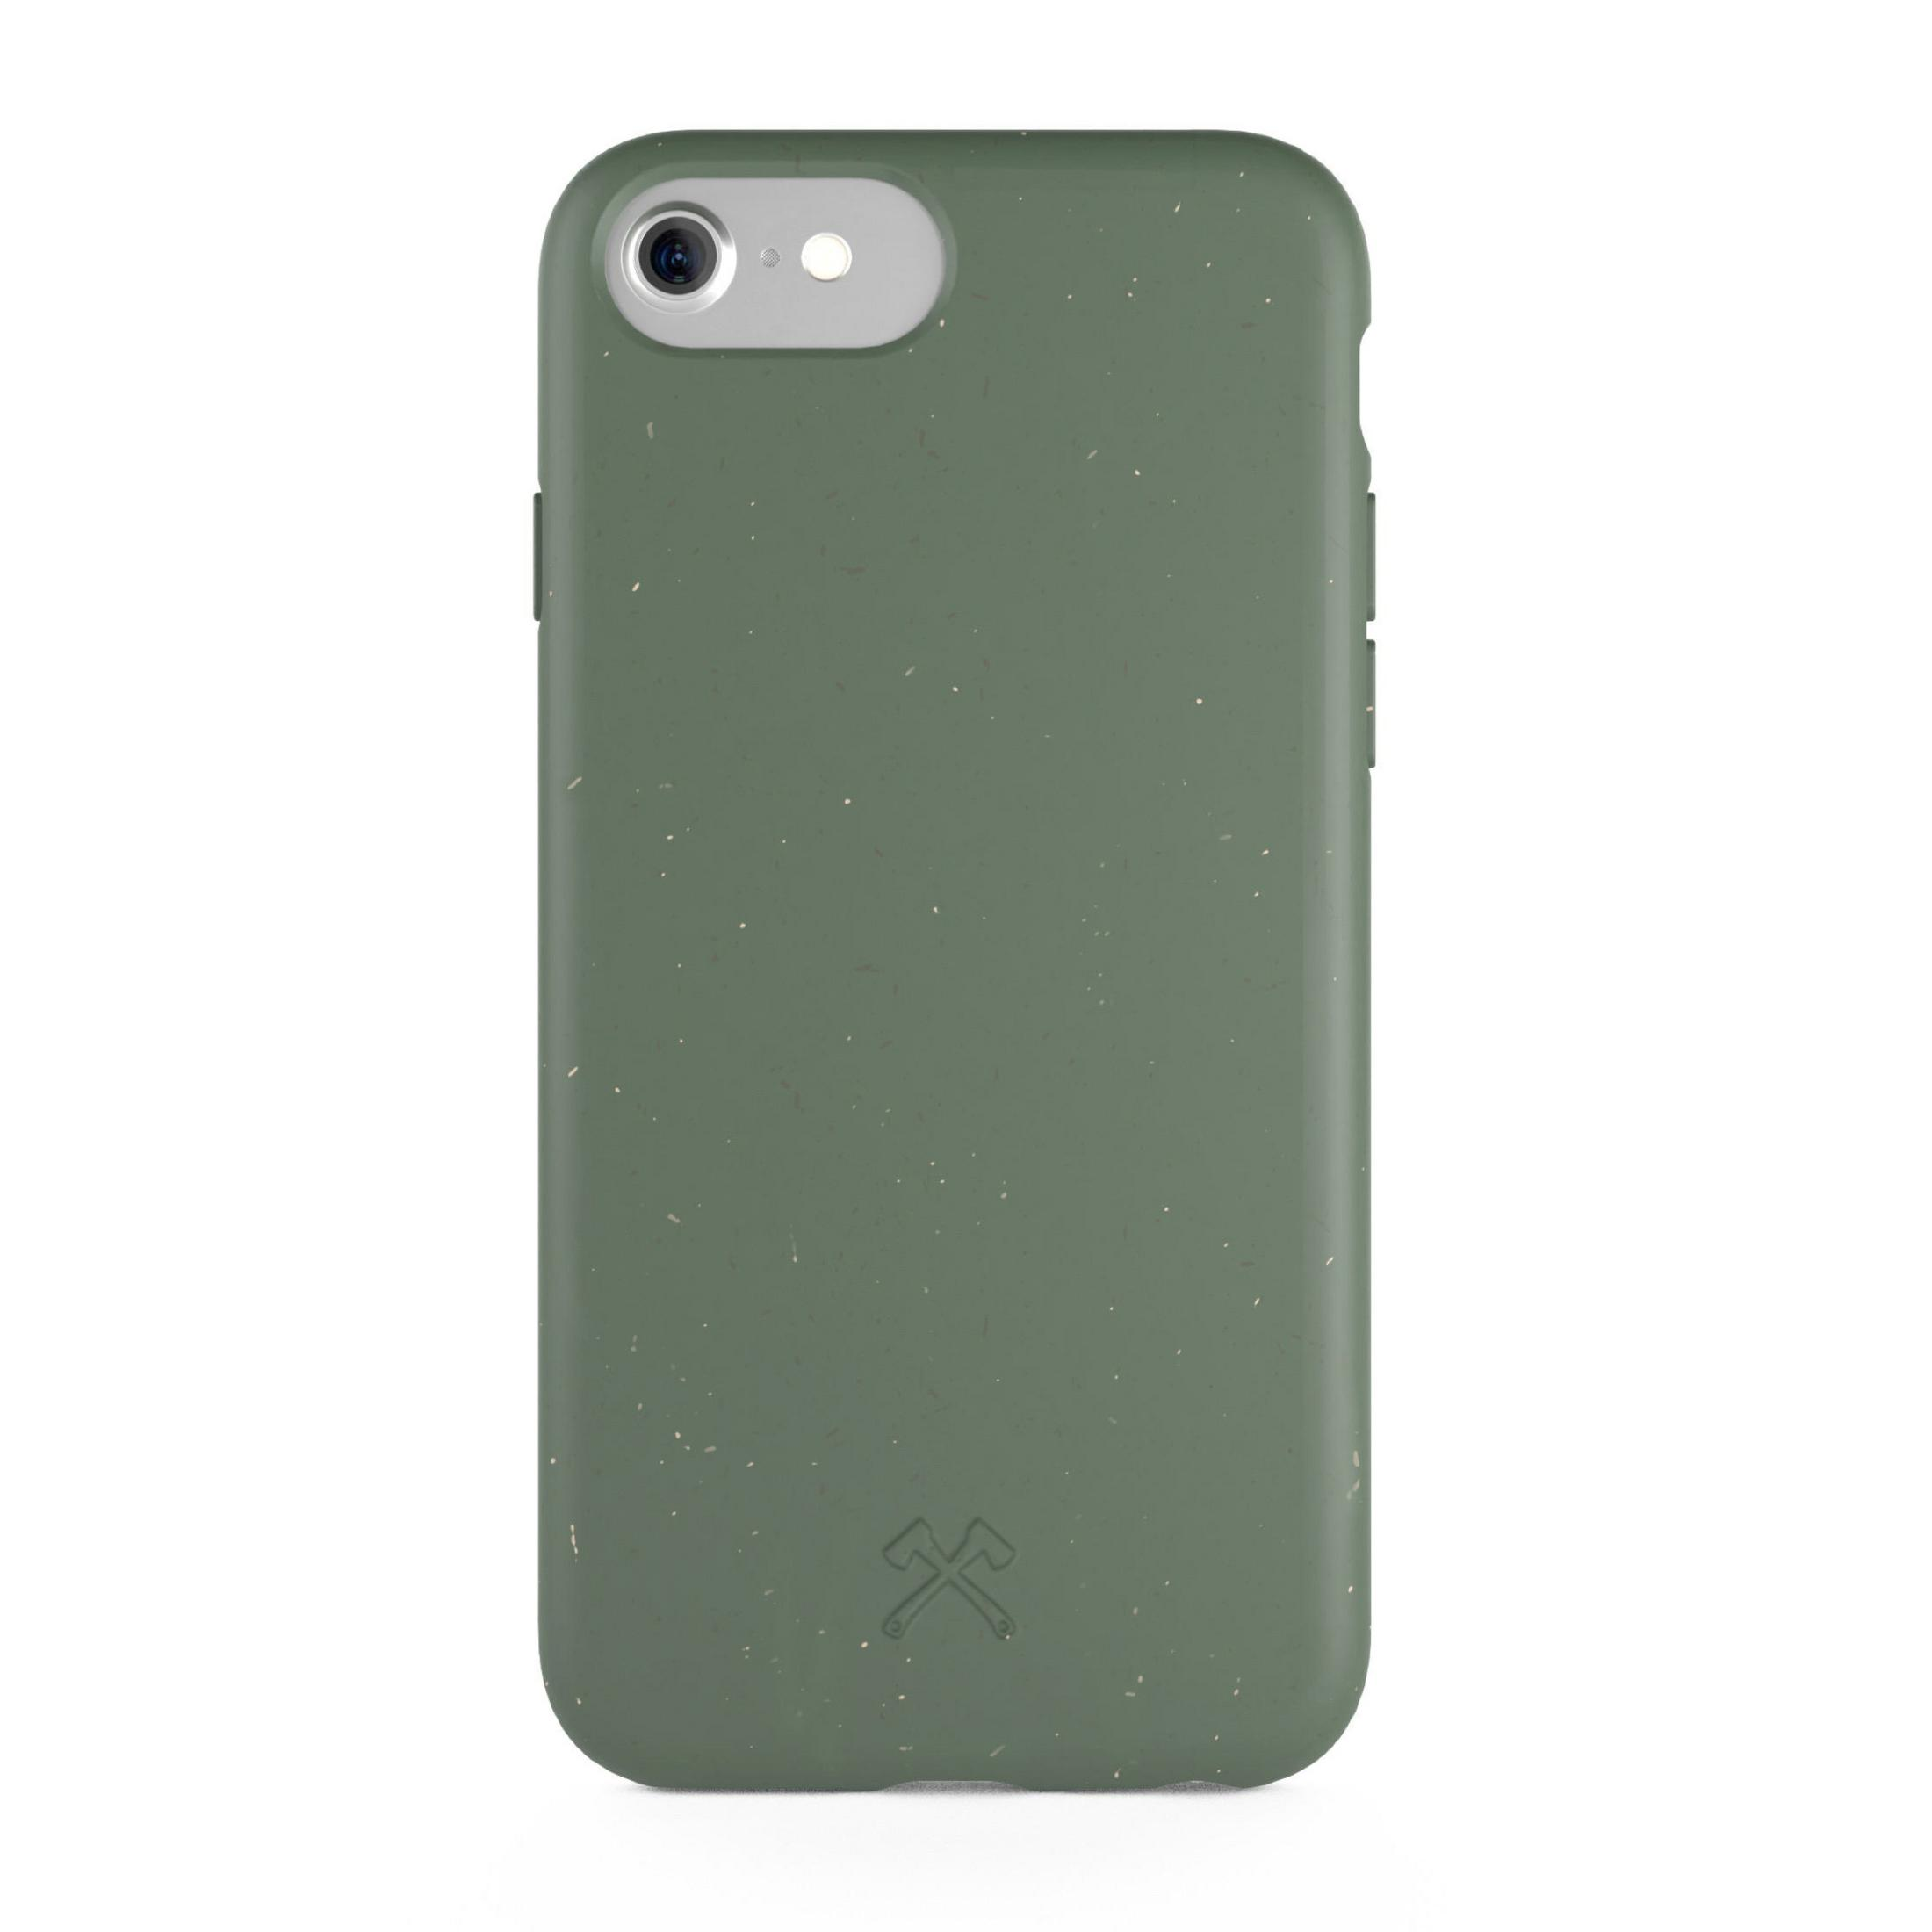 8 ANTIMICROBIAL 7 ECO425 8, 6, Grün SE, GREEN, 6 CASE SE Apple, WOODCESSORIES IP 7, BIO Backcover, iPhone